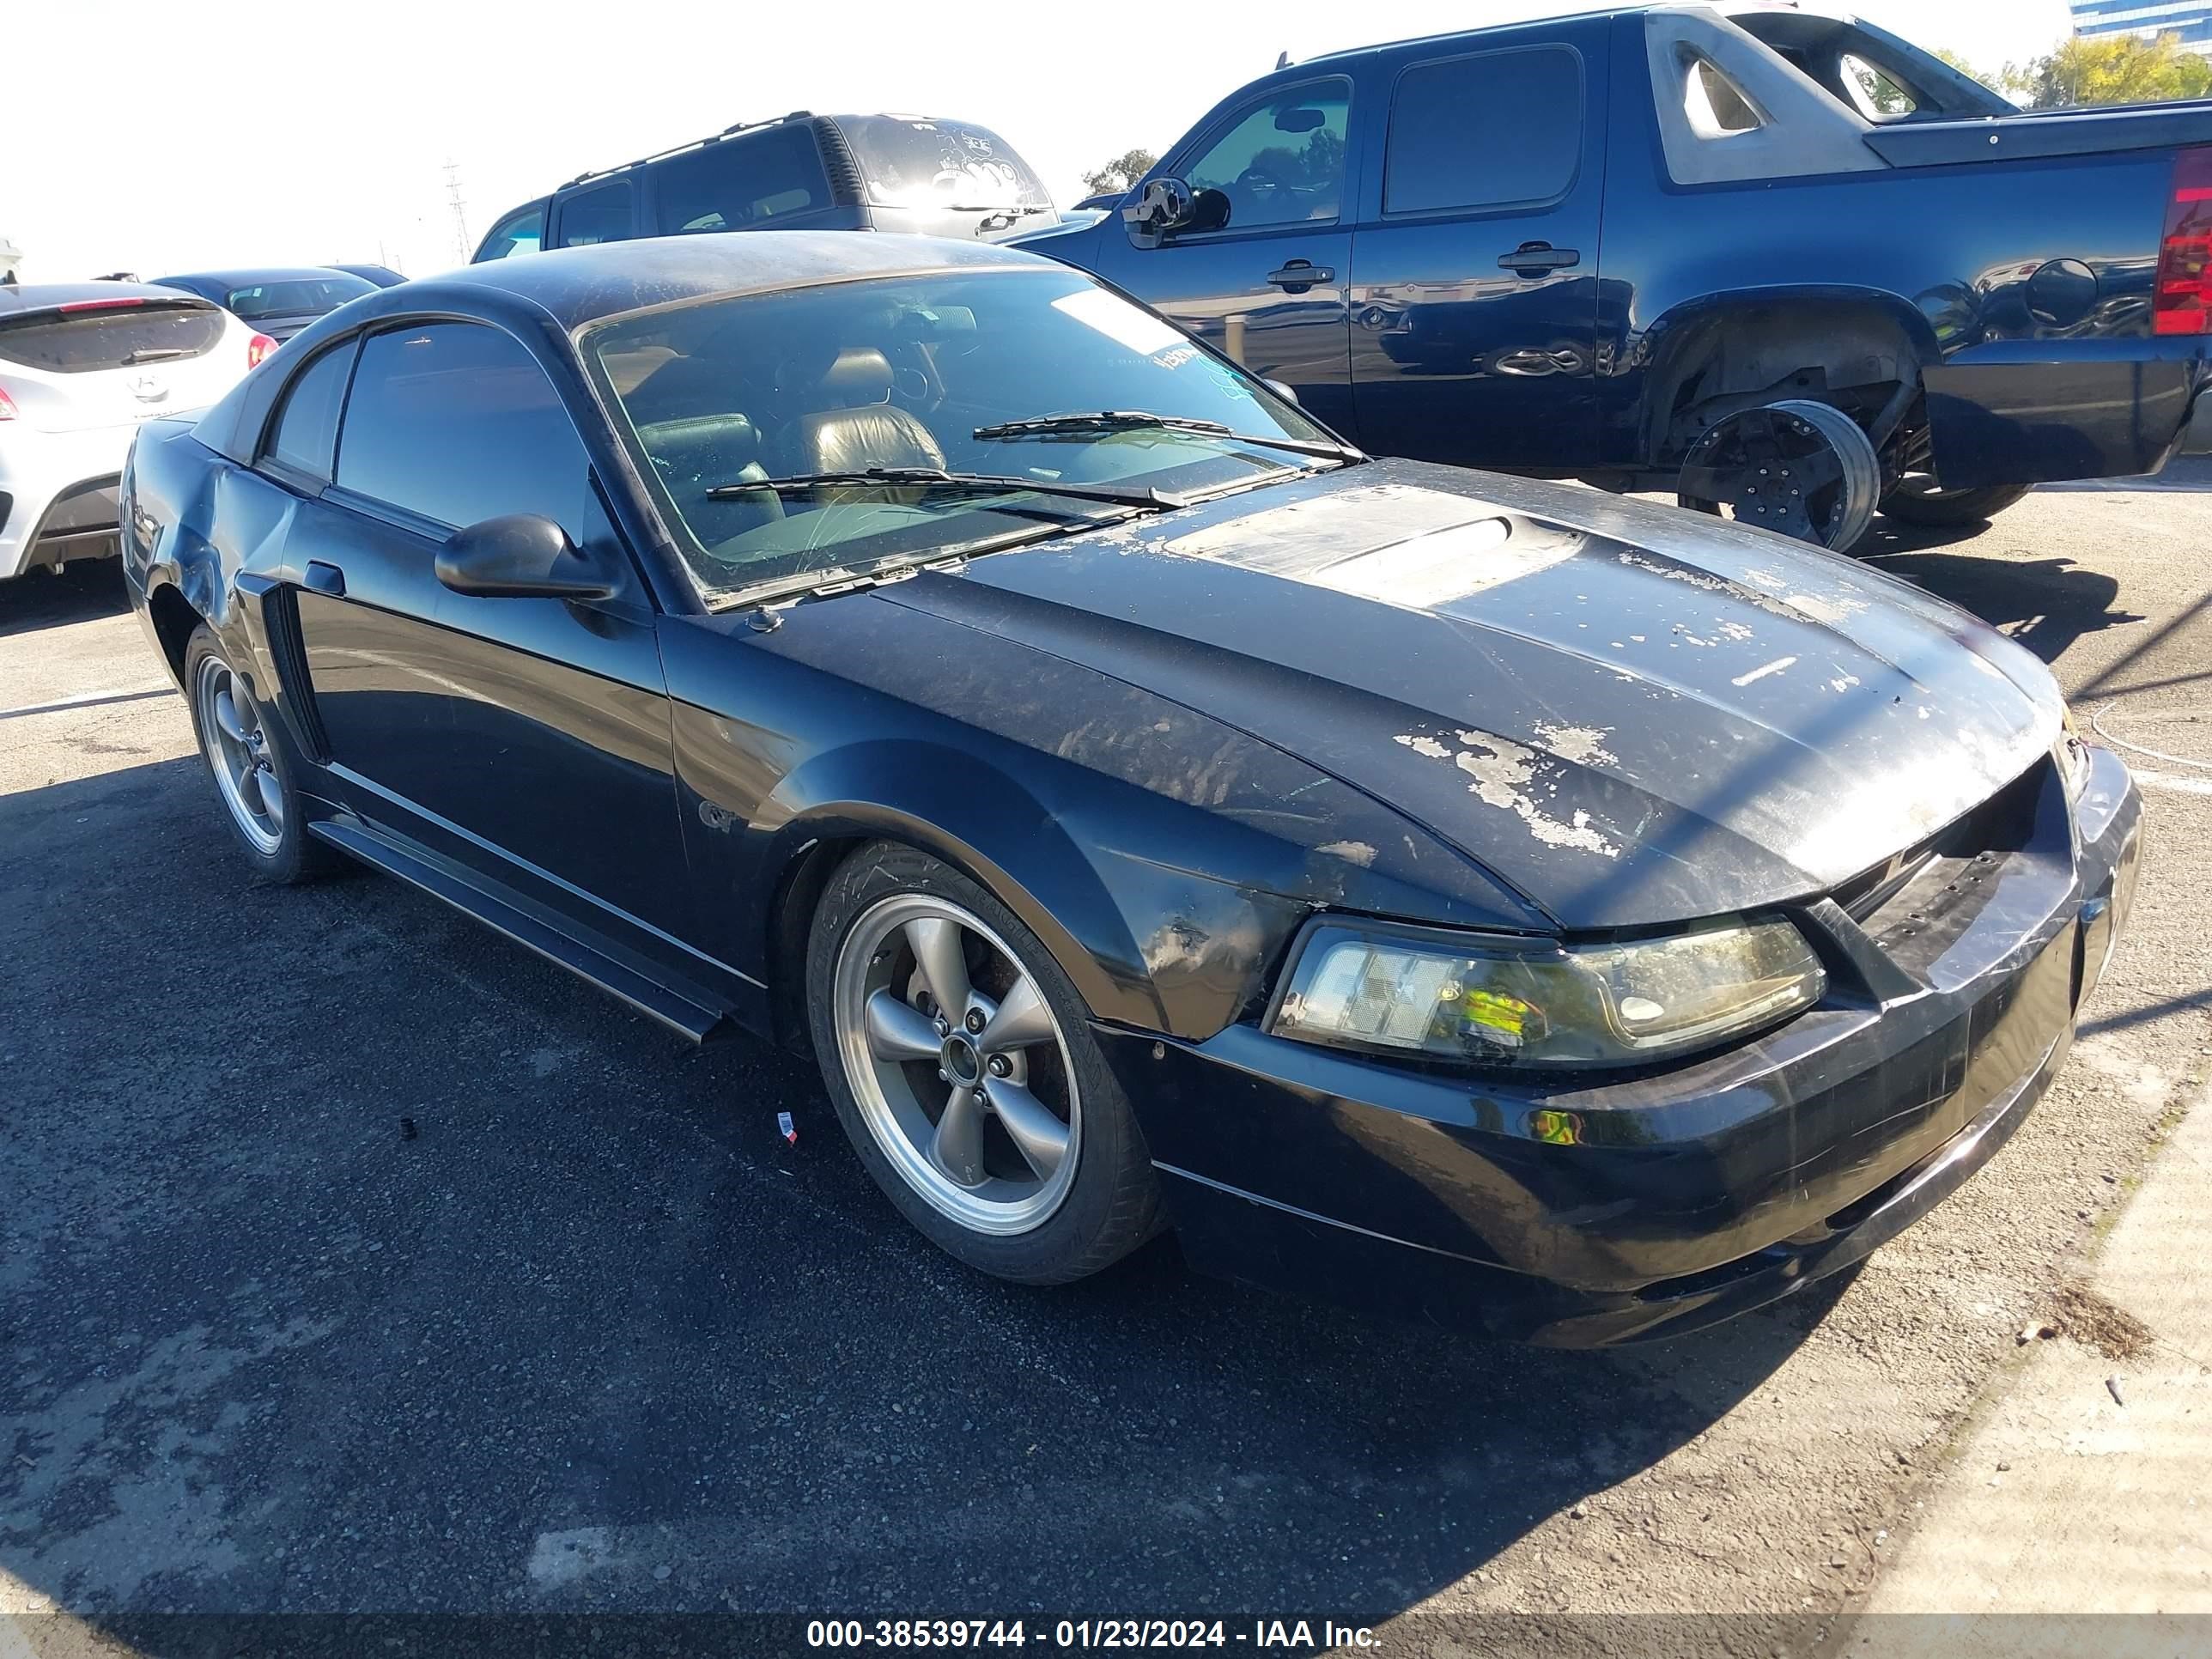 VIN: 1FAFP42X42F163926 - ford mustang